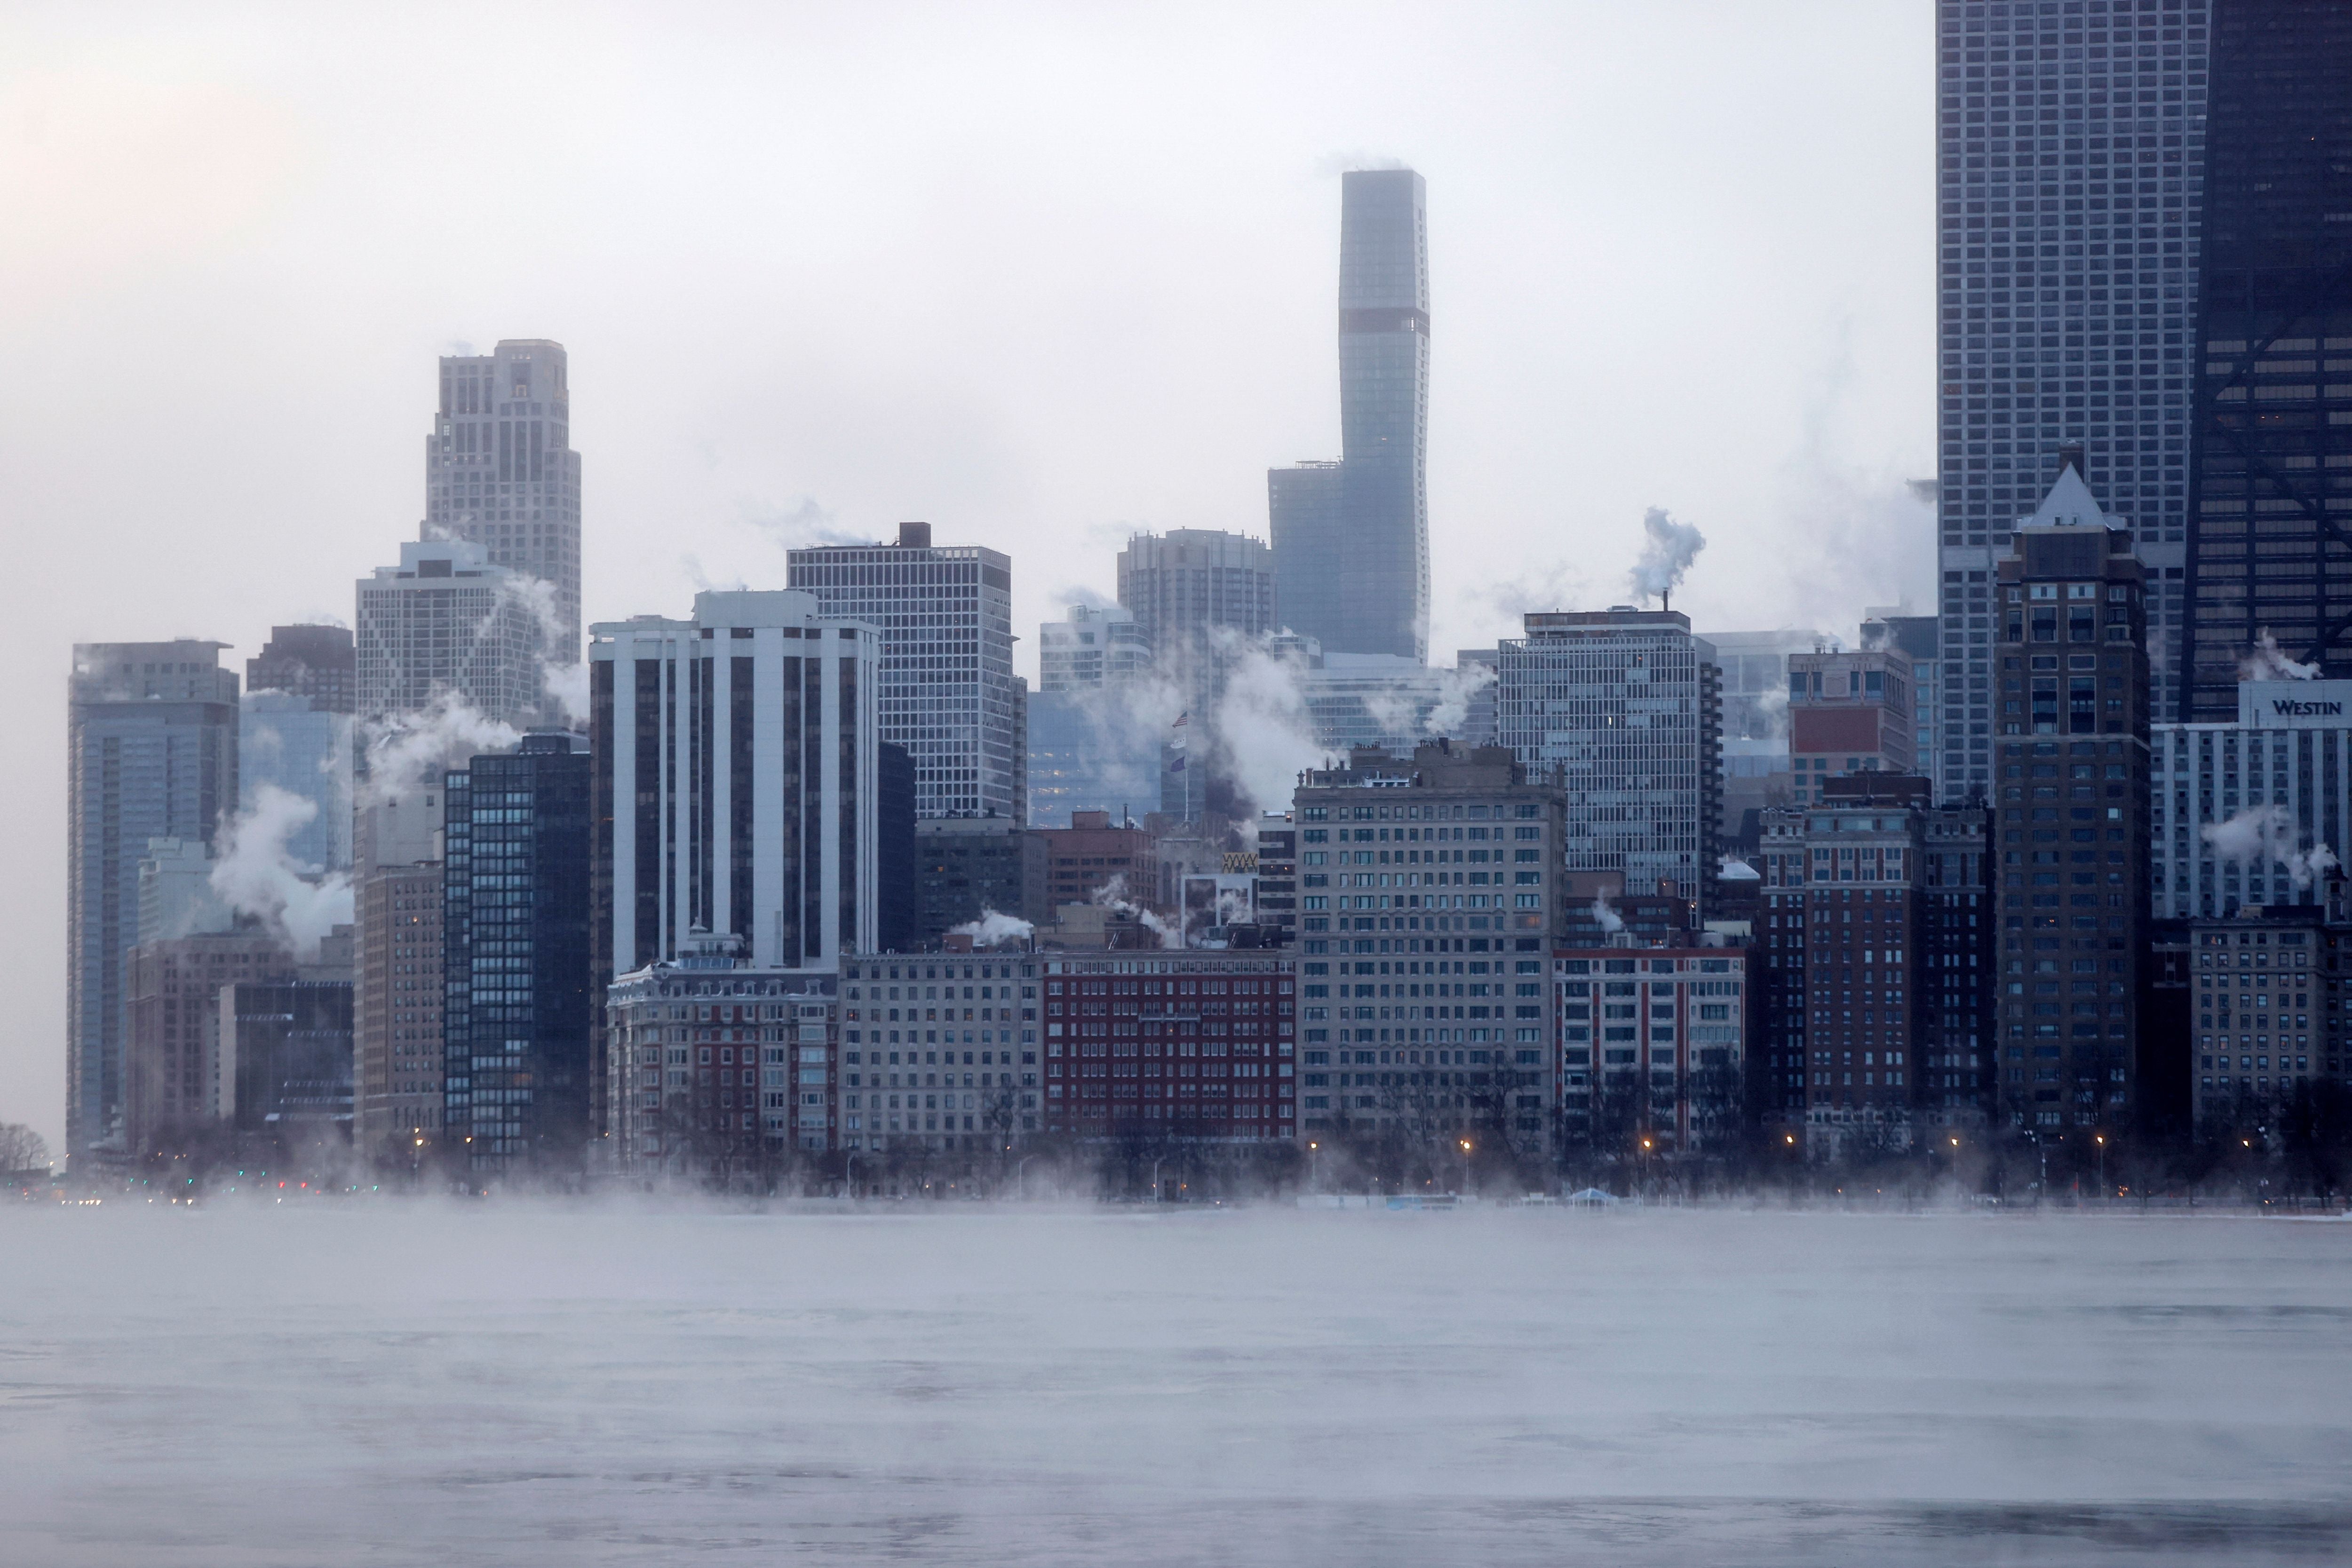 Mist rises from the ‘windy’ city of Chicago on the edge of Lake Michigan at sunrise on December 23, 2022, where temperatures reached -6F (-21C), ahead of the Christmas Holiday